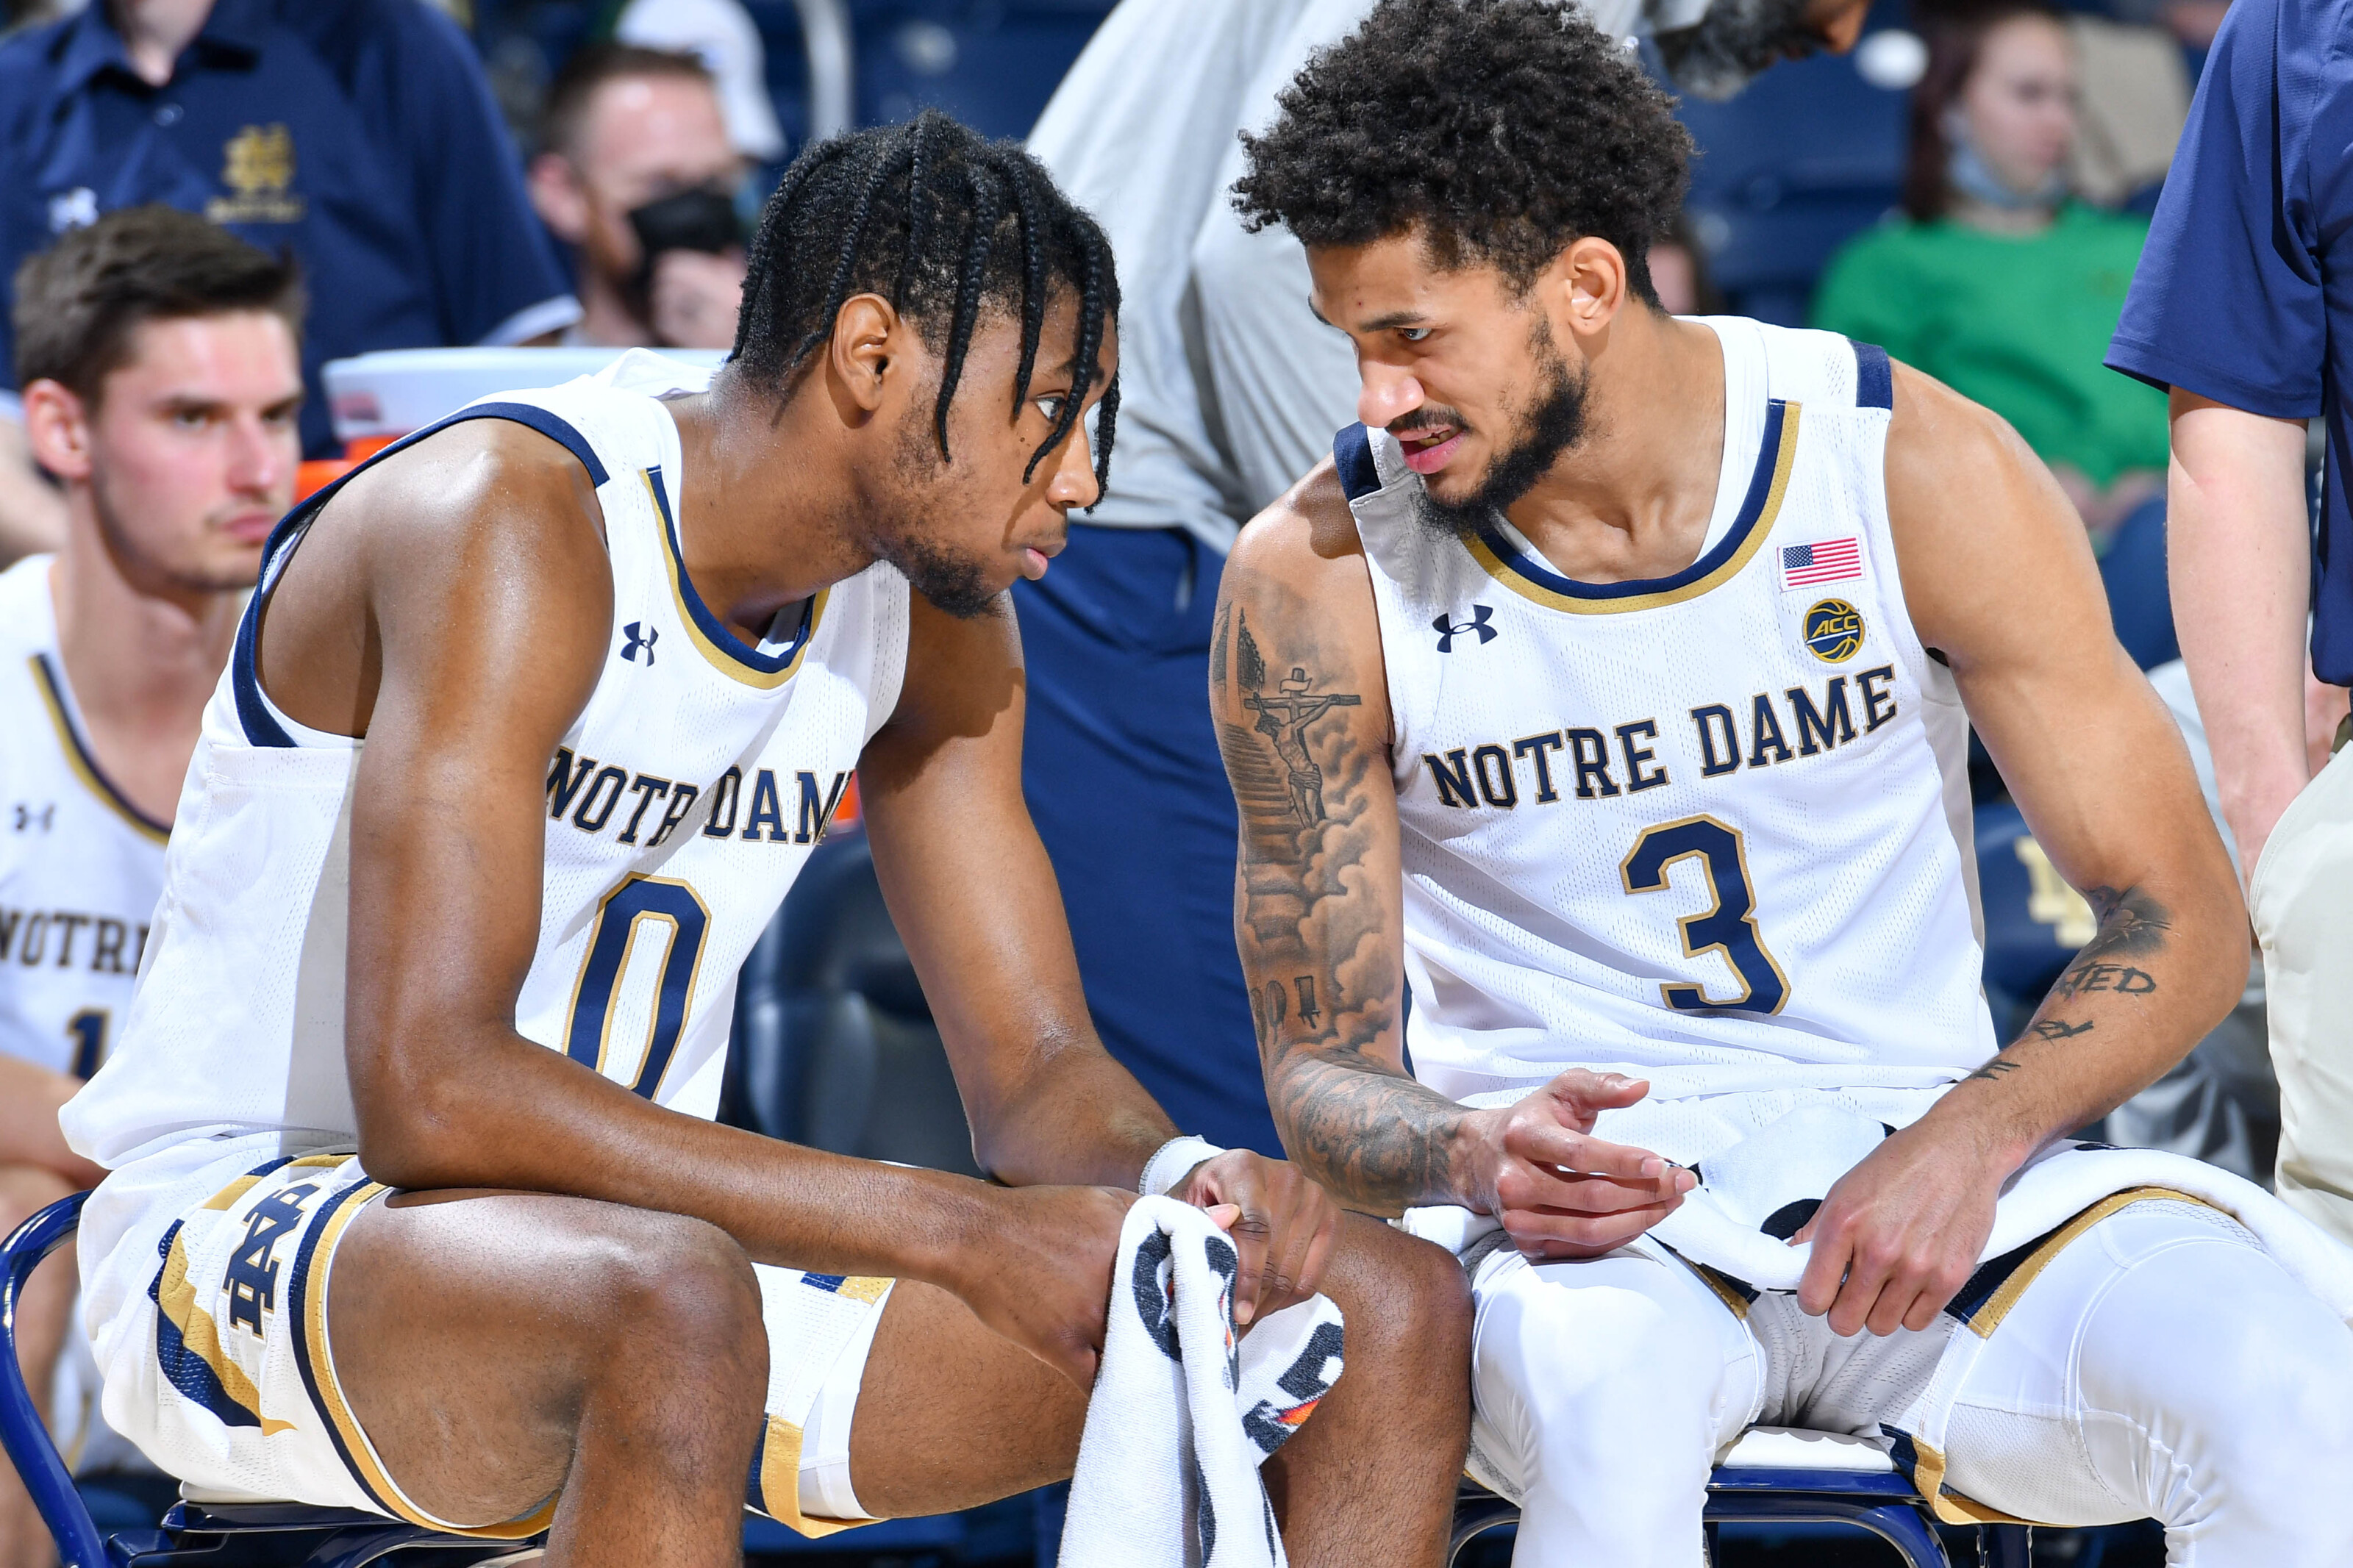 Notre Dame basketball Game Tonight Irish vs BC Line, Predictions, Odds, TV Channel and Live Stream for Basketball Game Feb